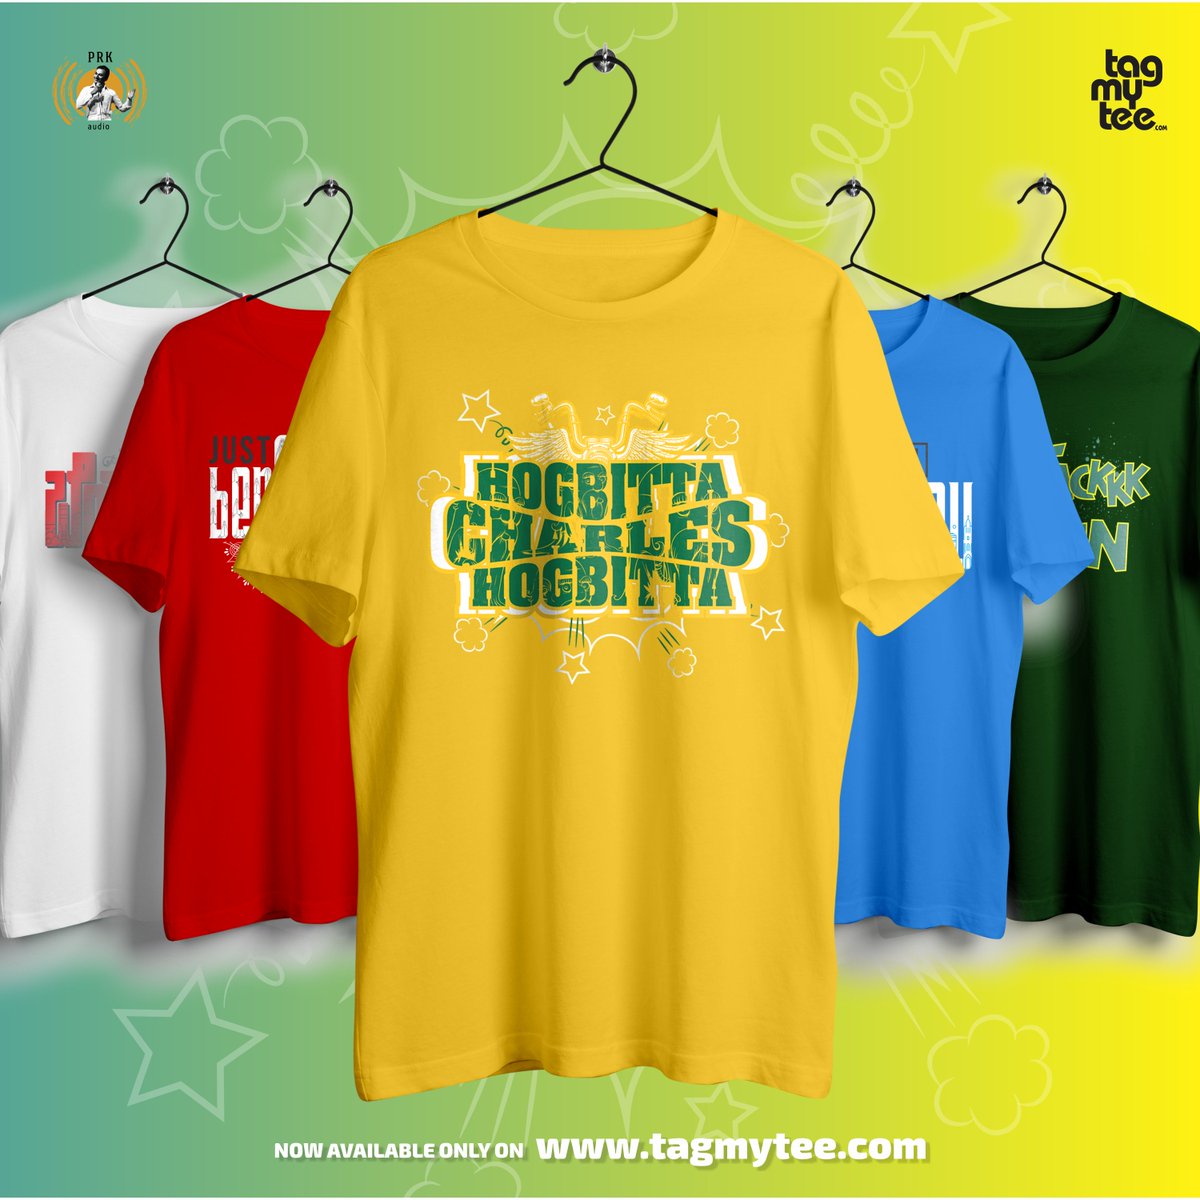 Get ready for all new French Biriyani Merchandise. 

Introducing Hogbitta Charles Hogbitta T-shirt from the house of PRK Audio

tagmytee.com/collections/fr…

#prkproduction #PuneethRajkumar  #hogbittacharleshogbitta #tagmytee #rahulthetshirtguy